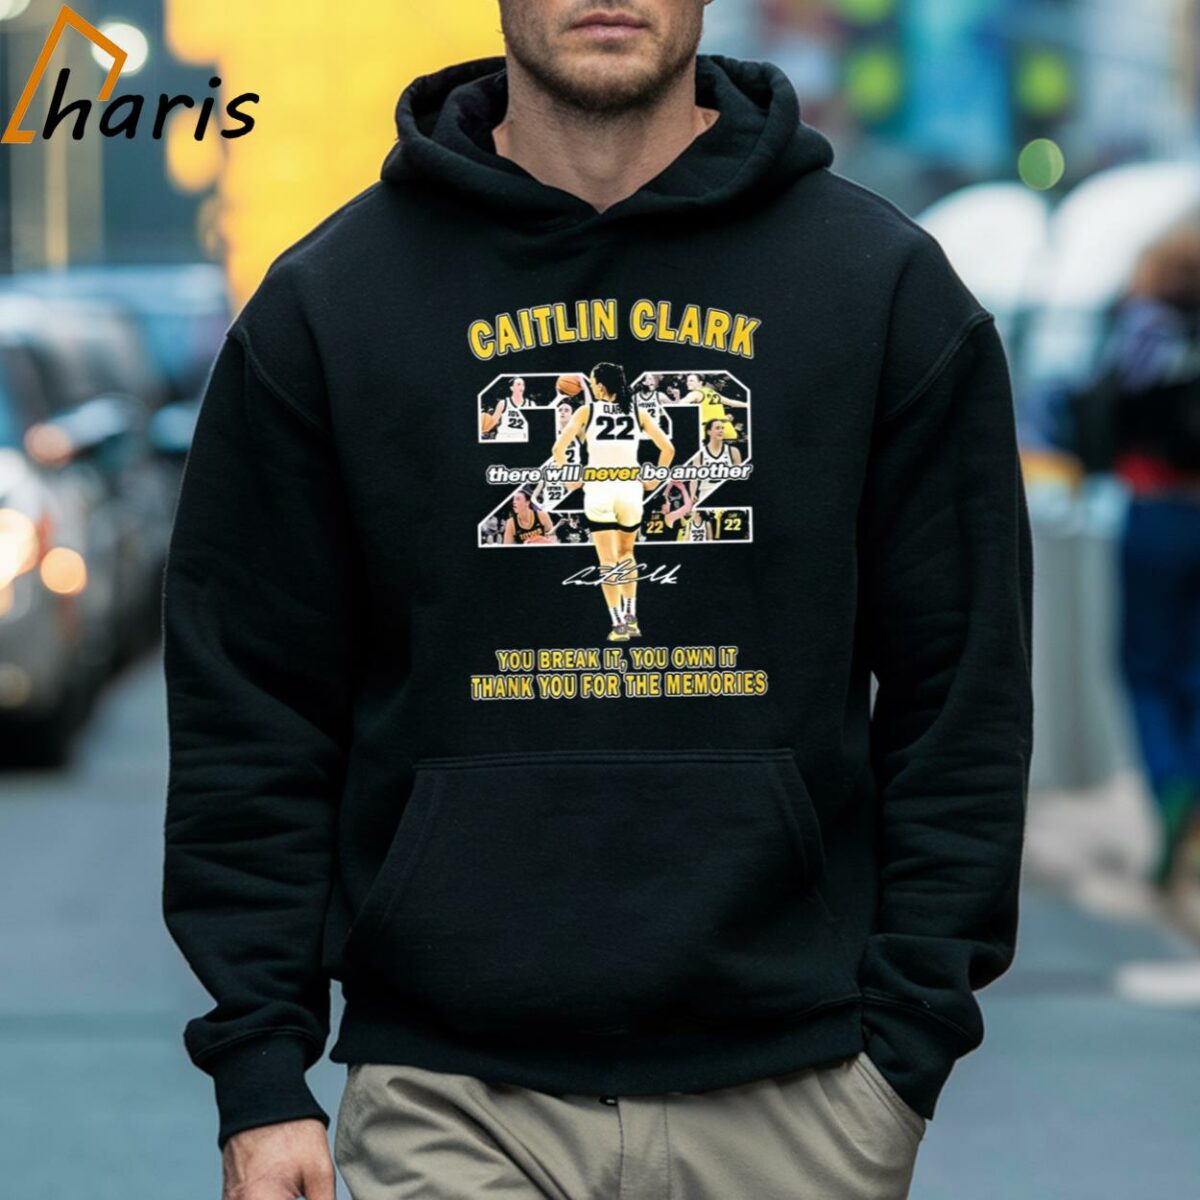 Caitlin Clark There Will Never Be Another You Break It You Own It Thank You For The Memories Signature T shirt 5 Hoodie